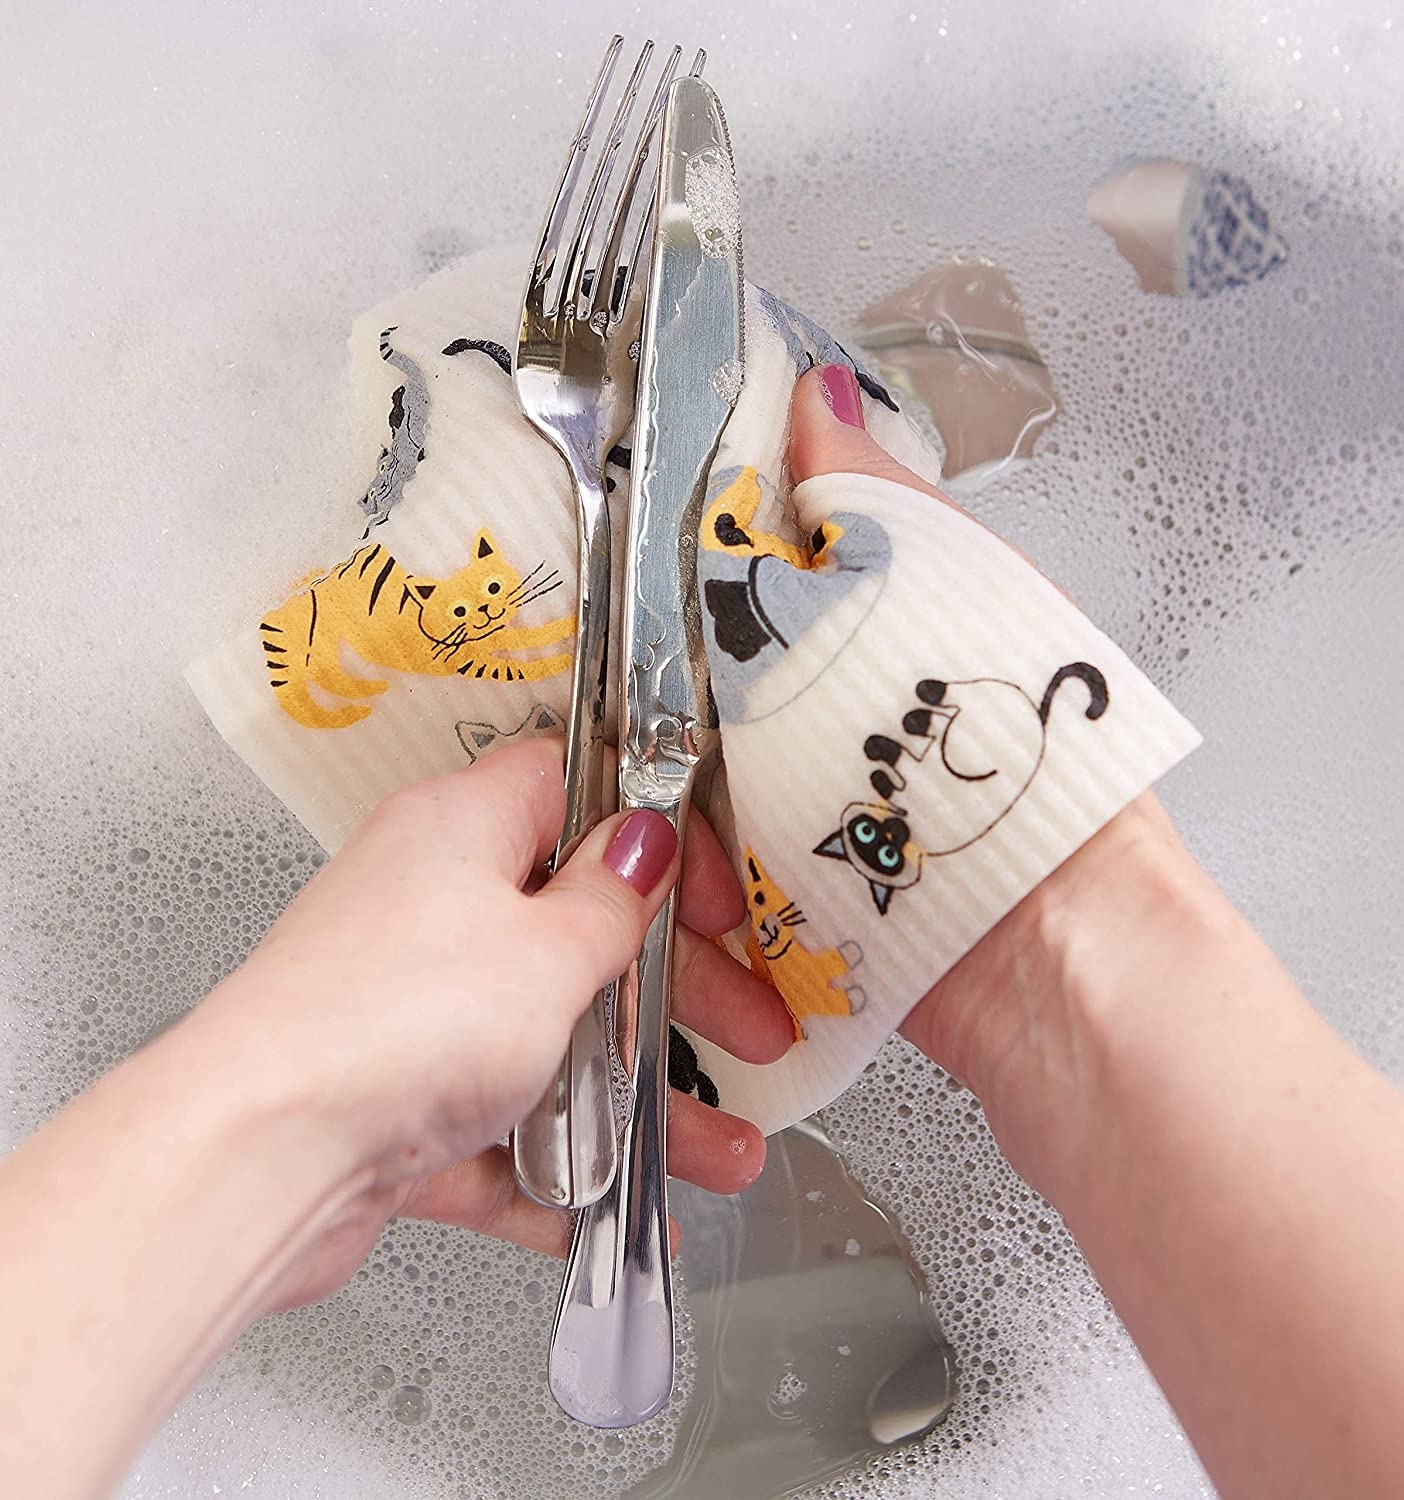 A person washing a knife and fork with a square-shaped Swedish dish cloth with happy cats printed on it